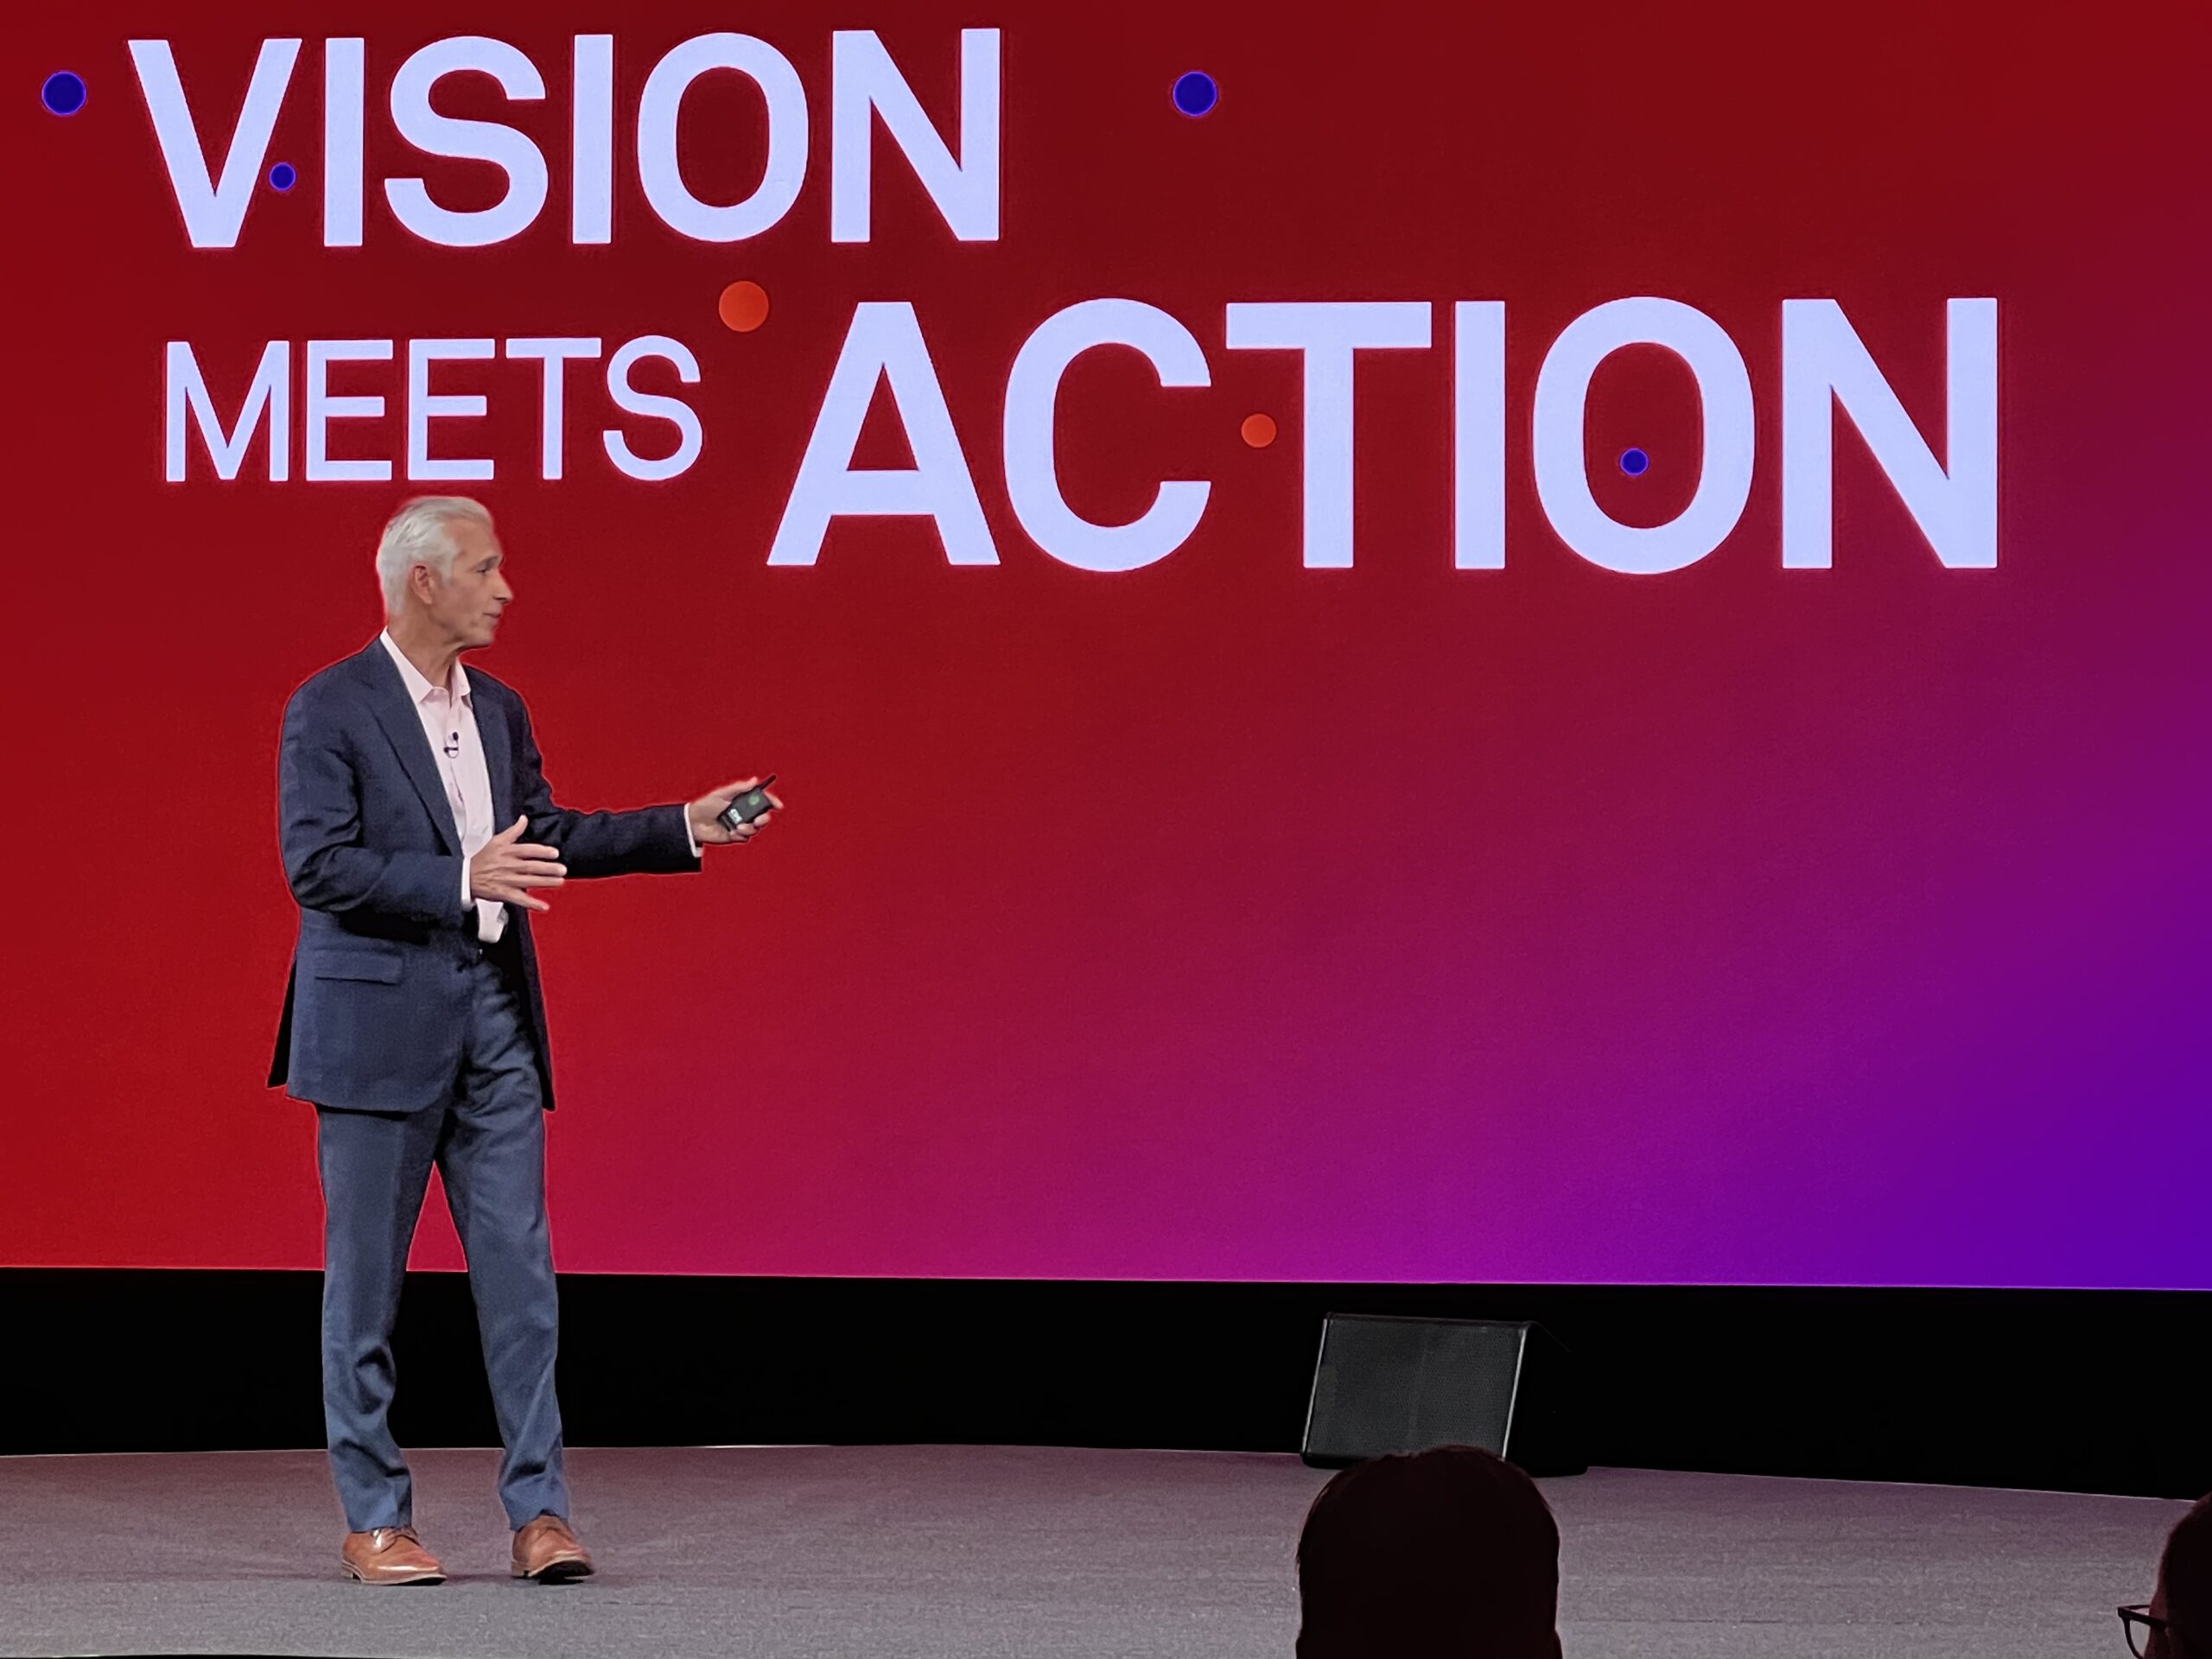 The Ricoh Partner Summit Showcased Growth, Diversification, and What’s Next